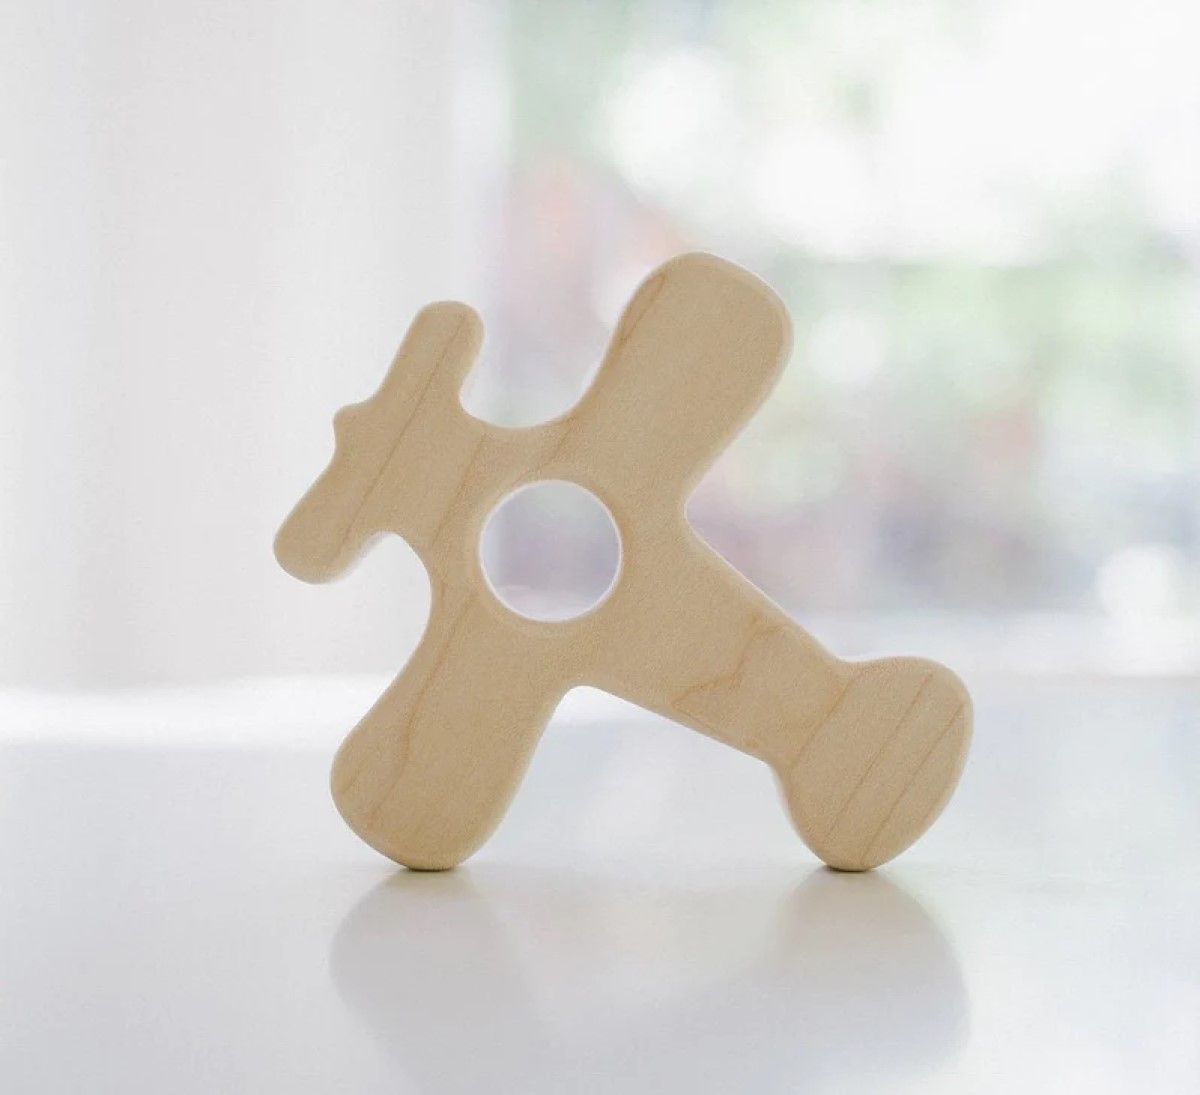 Wood Grasping Teether Toy, Airplane